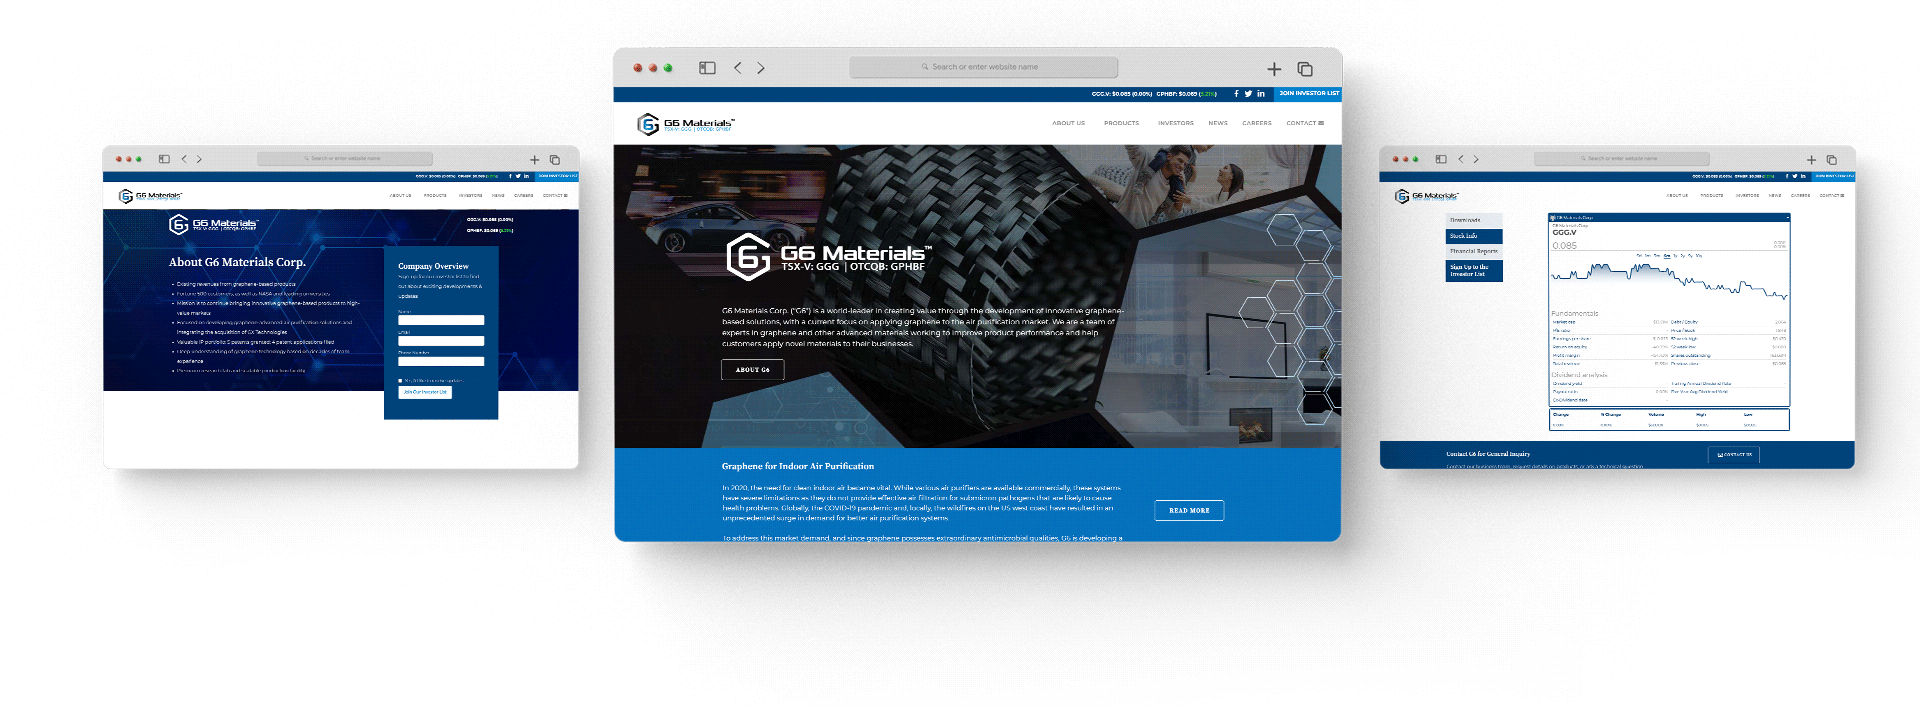 Website Development for G6 Materials by Rough Works Case Study